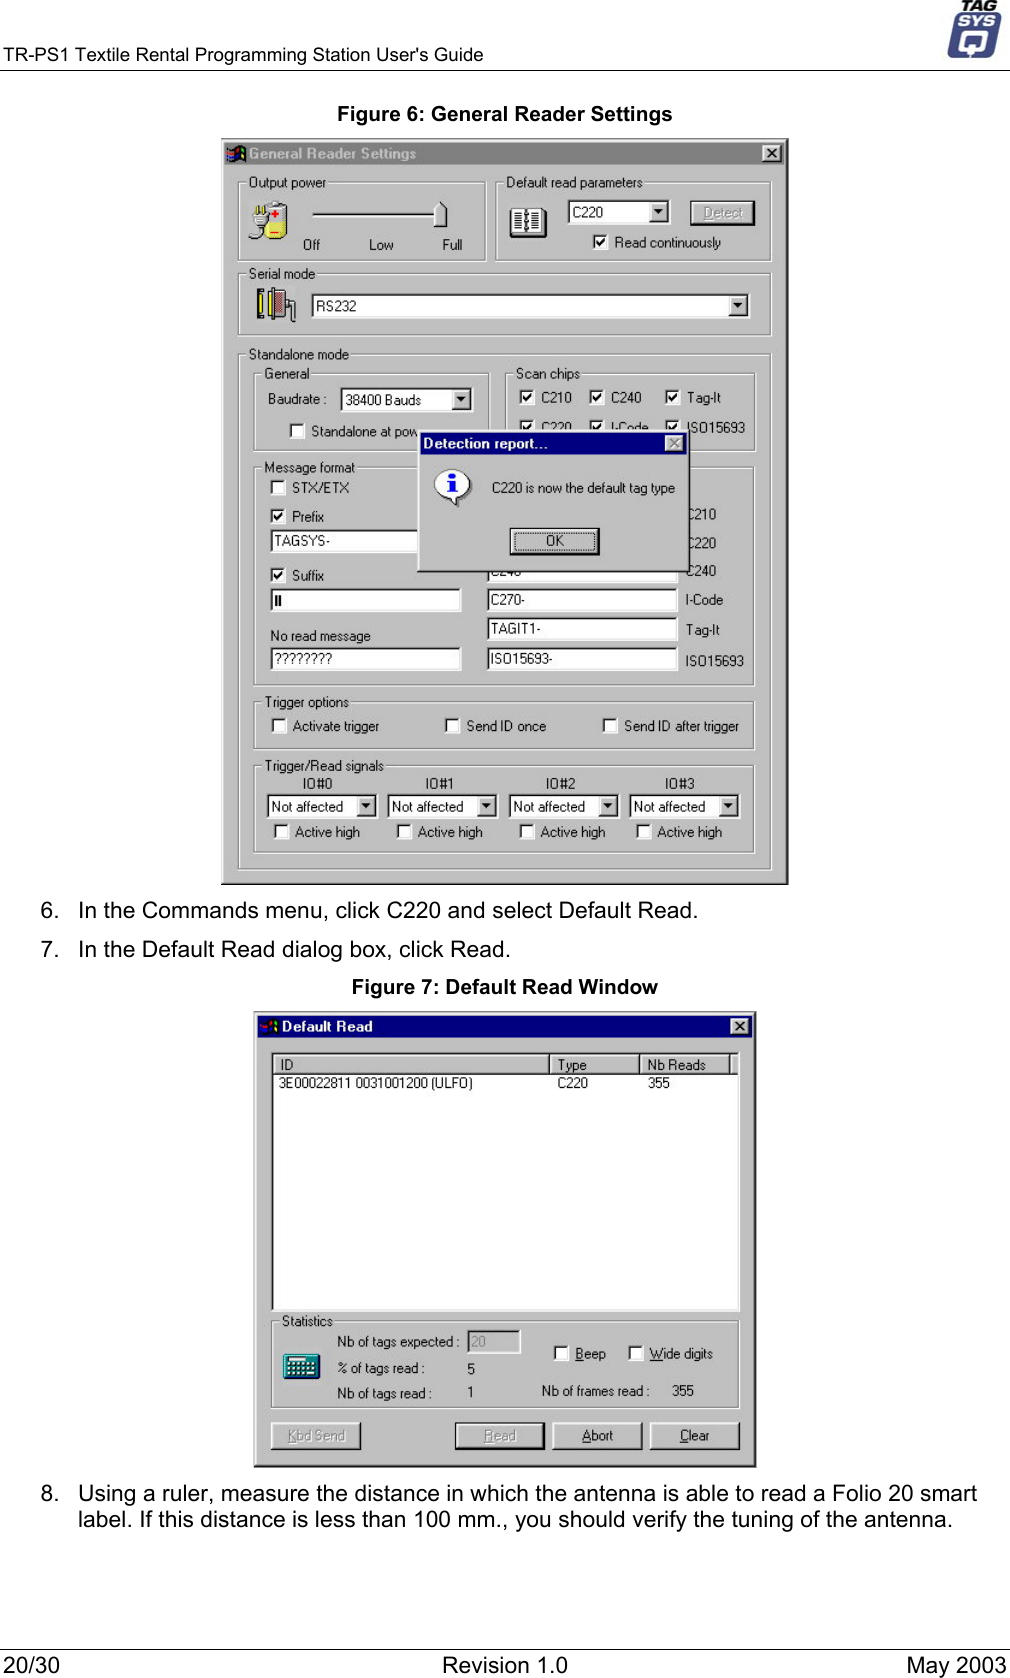 TR-PS1 Textile Rental Programming Station User&apos;s Guide     Figure 6: General Reader Settings  6.  In the Commands menu, click C220 and select Default Read. 7.  In the Default Read dialog box, click Read.  Figure 7: Default Read Window  8.  Using a ruler, measure the distance in which the antenna is able to read a Folio 20 smart label. If this distance is less than 100 mm., you should verify the tuning of the antenna.  20/30  Revision 1.0  May 2003 